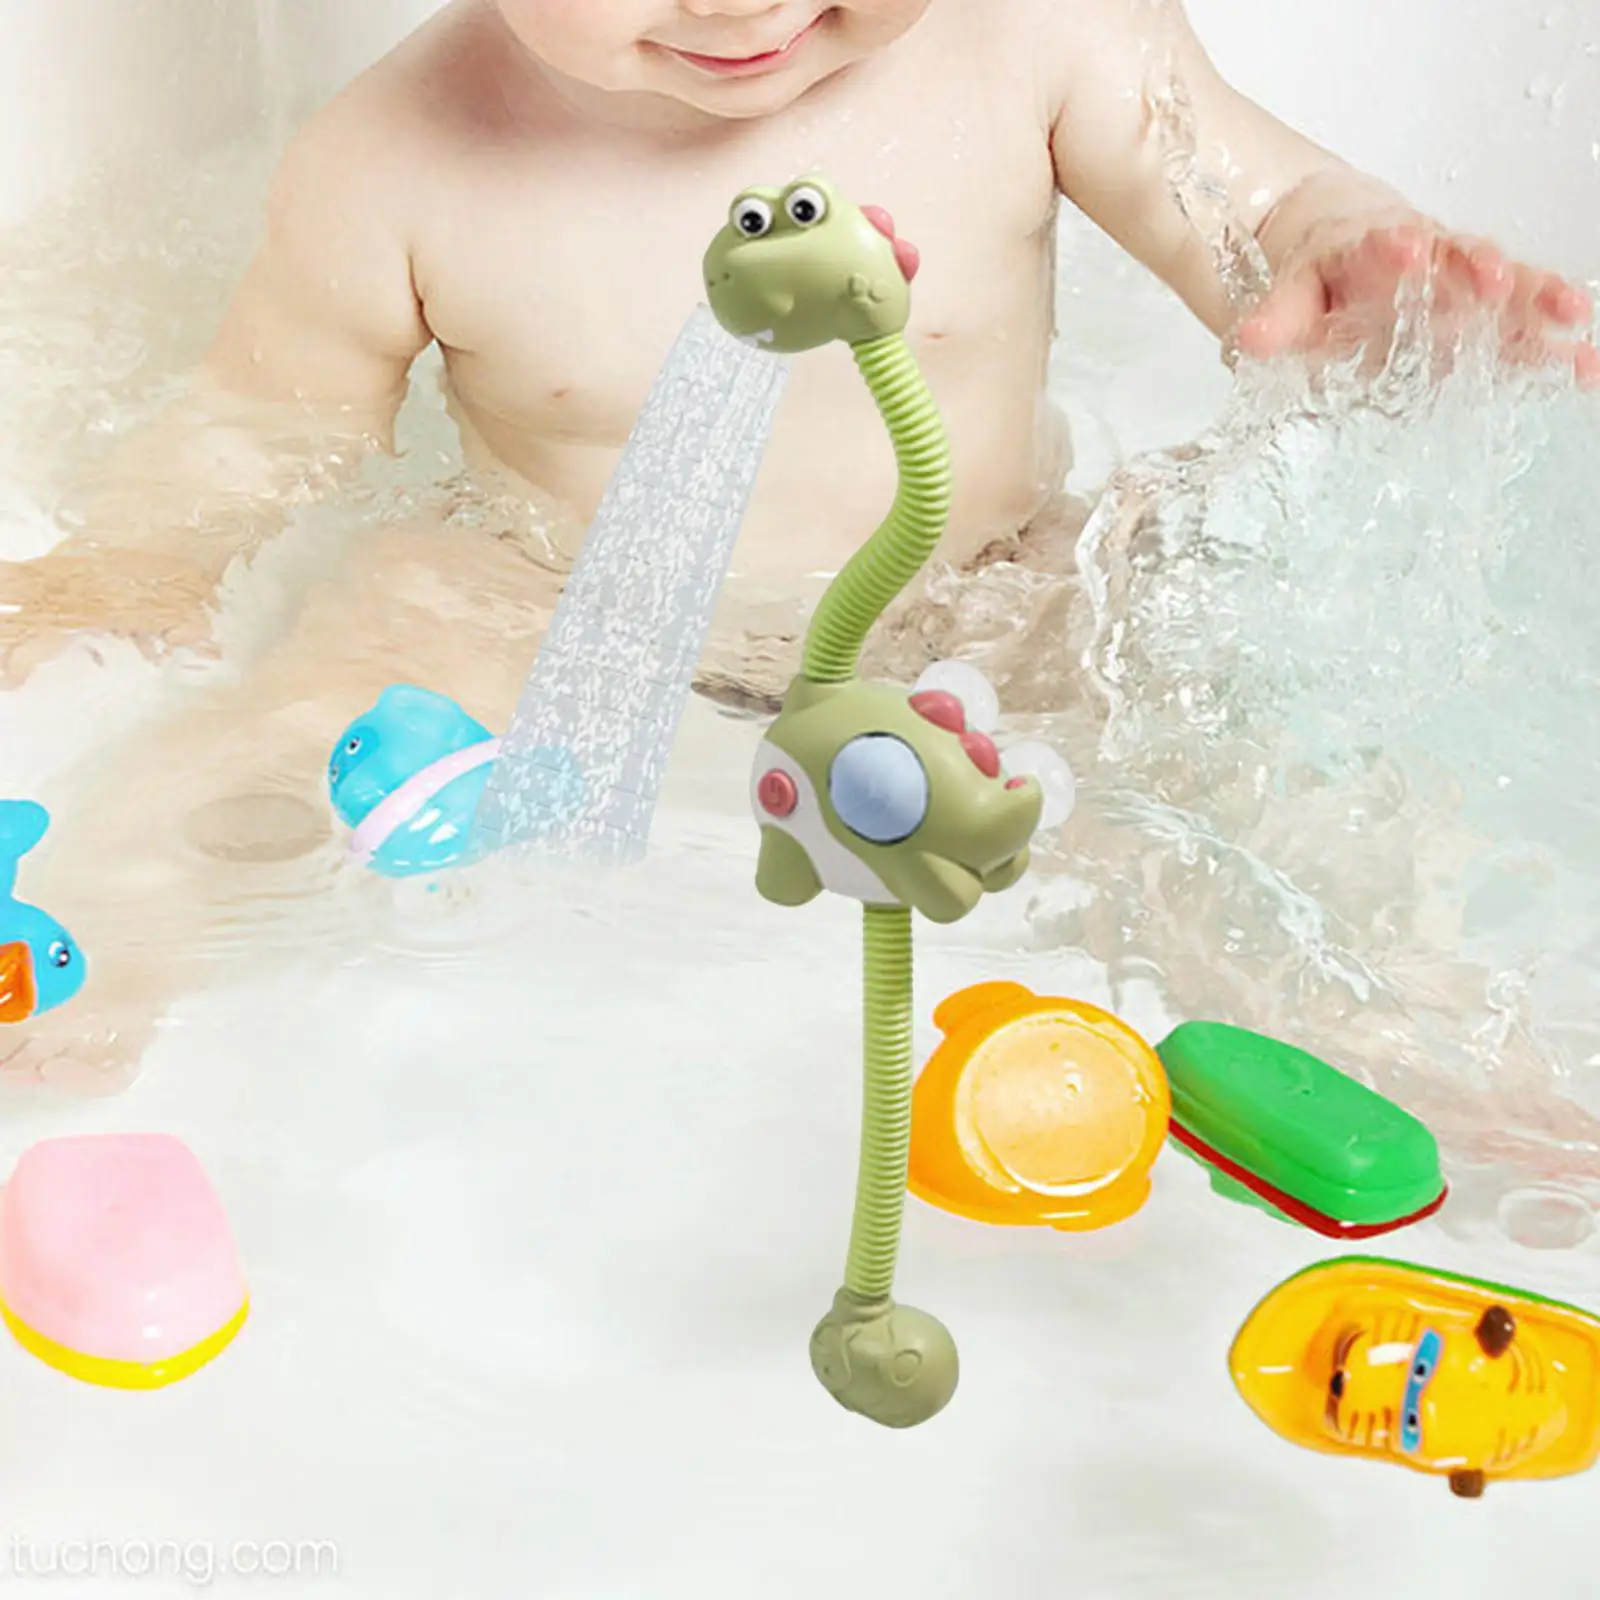 Infant Electric Shower Water Pump 360 Rotating and Adjusting Direction Bathtub Toy for Bathroom Pool Birthday Gift Toddles